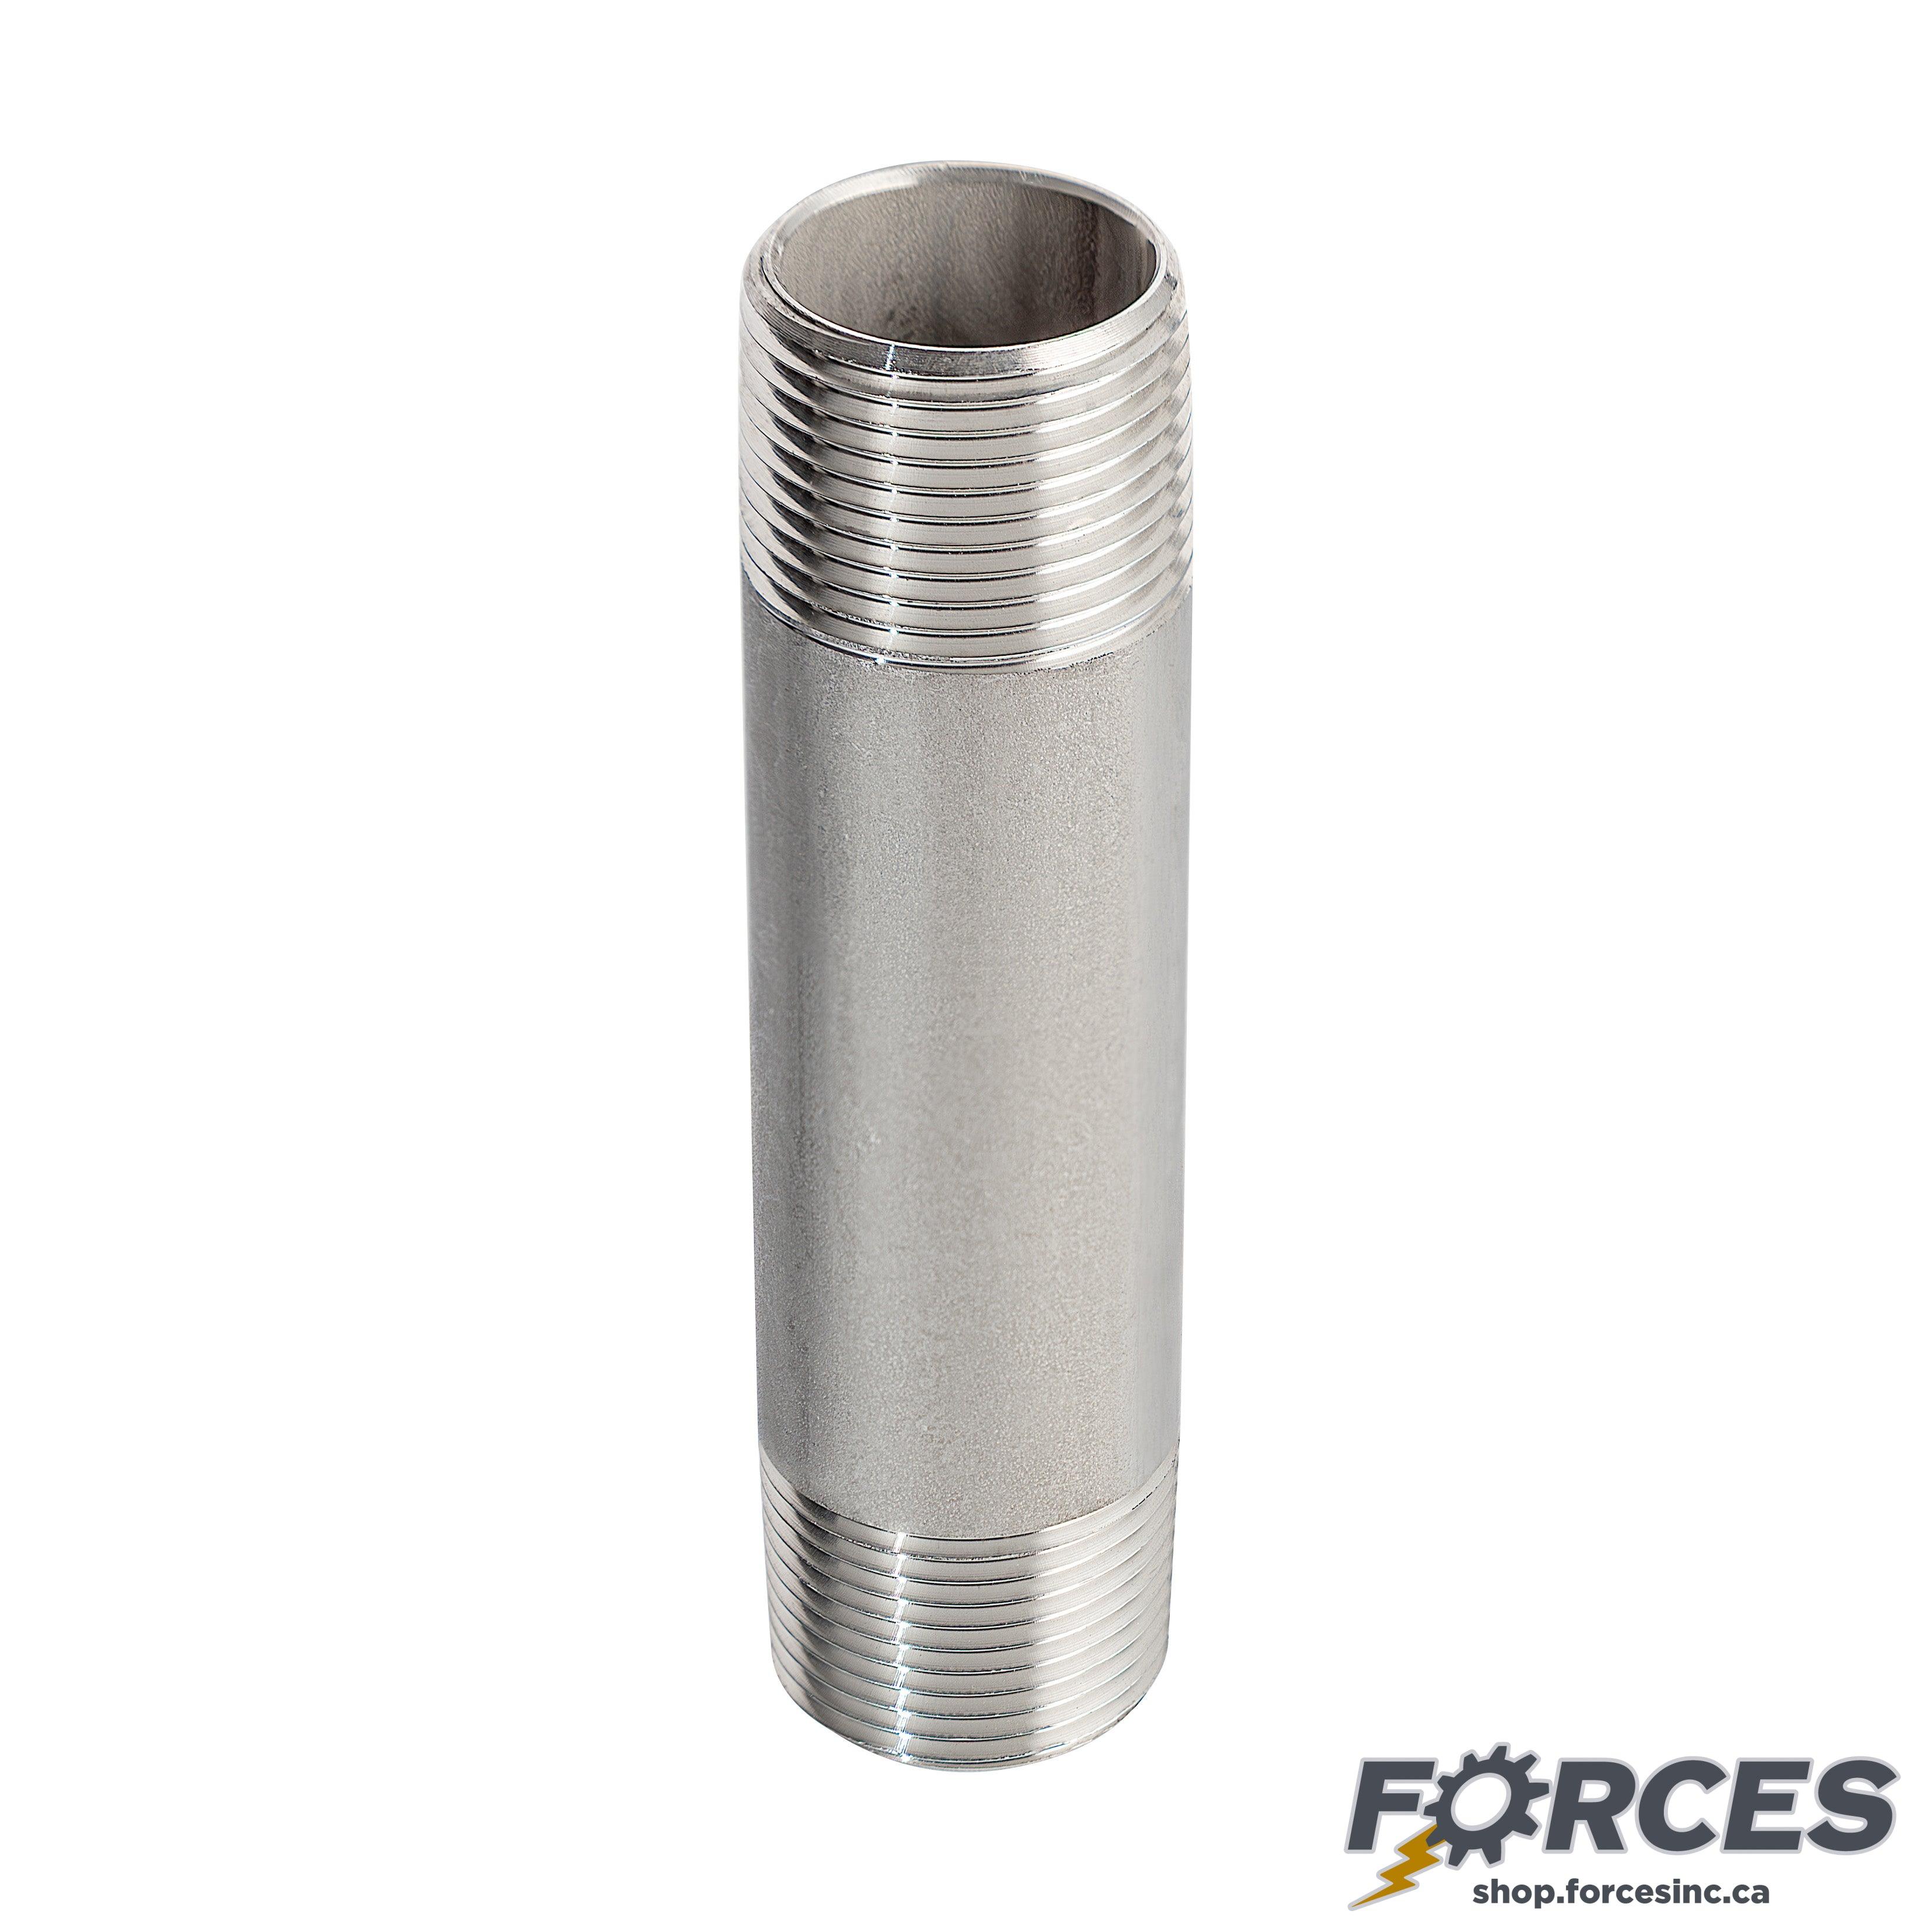 1" X 2" Long Nipple - Stainless Steel 316 - Forces Inc